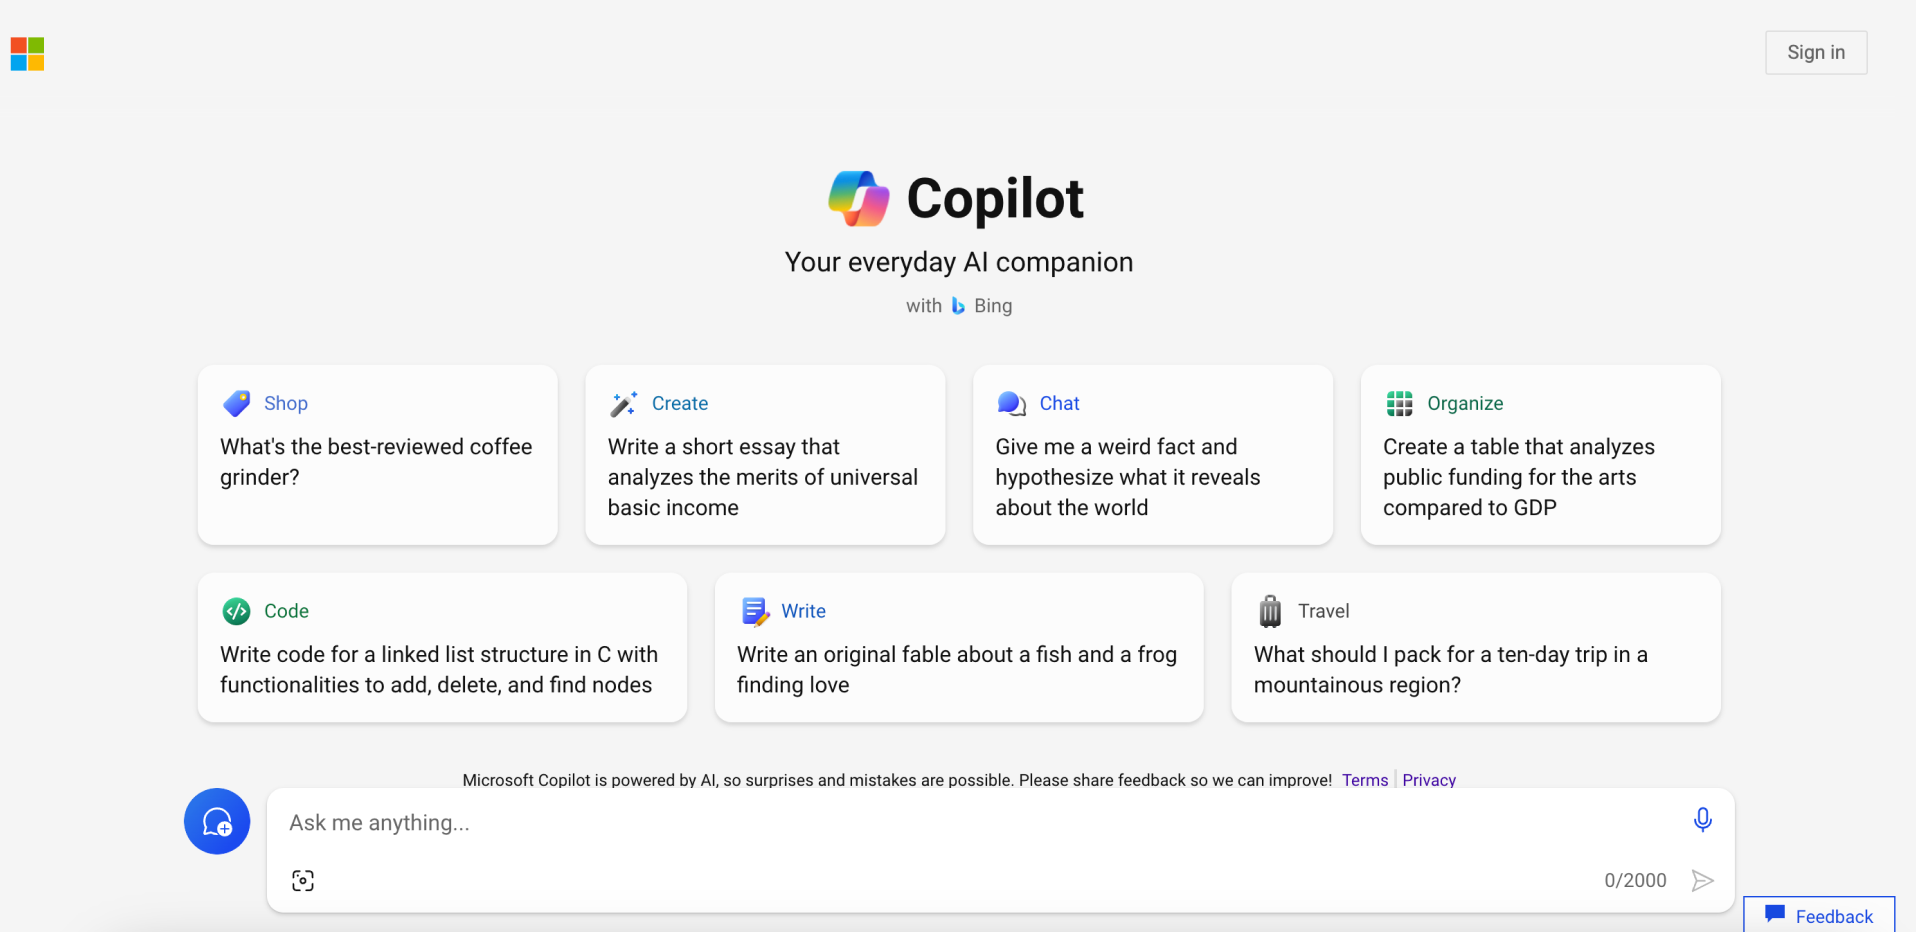 How to access Copilot